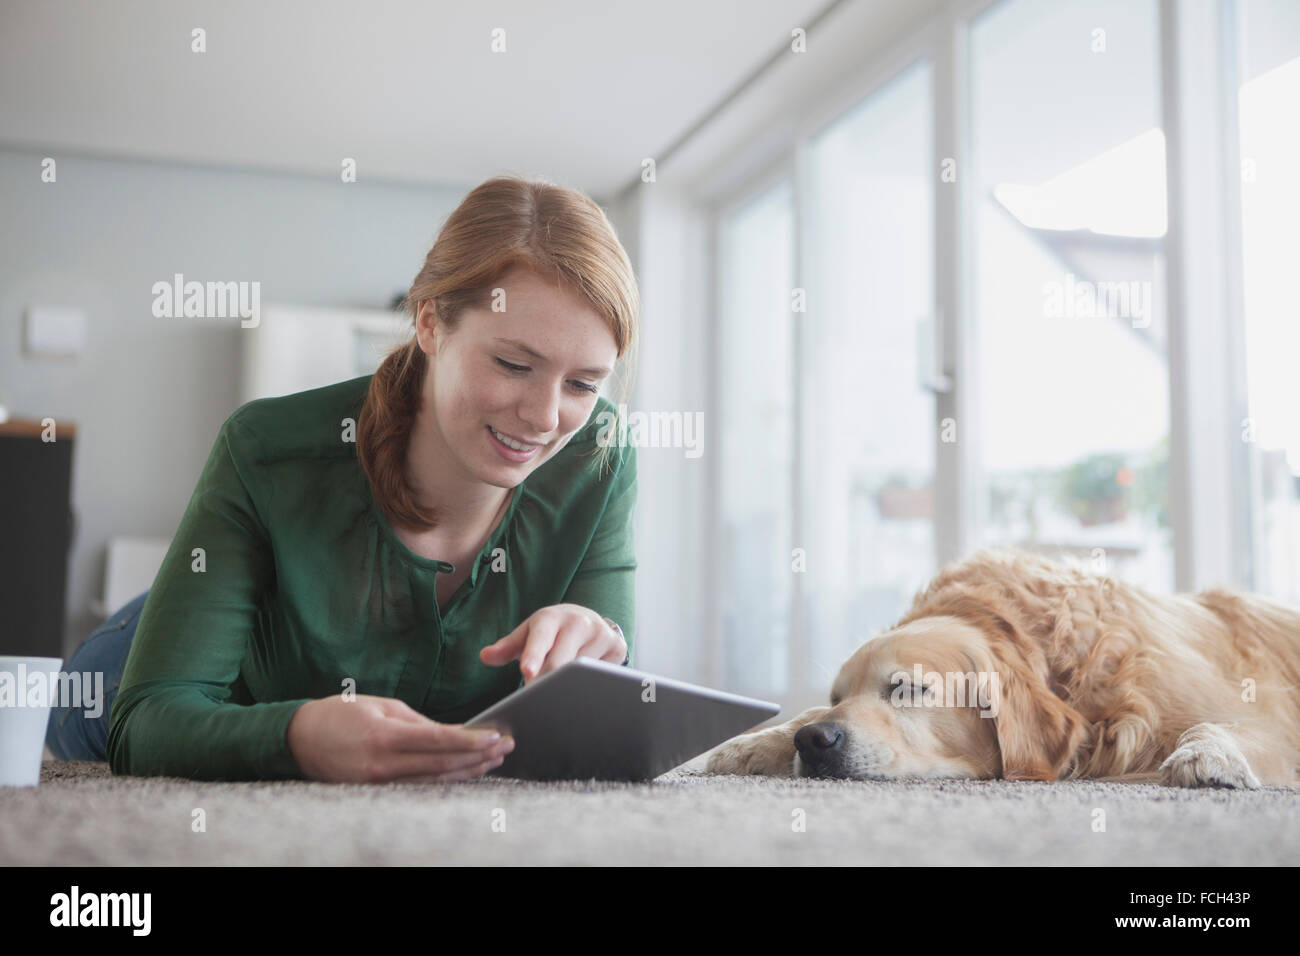 Smiling young woman lying beside her sleeping dog on the carpet using digital tablet Stock Photo